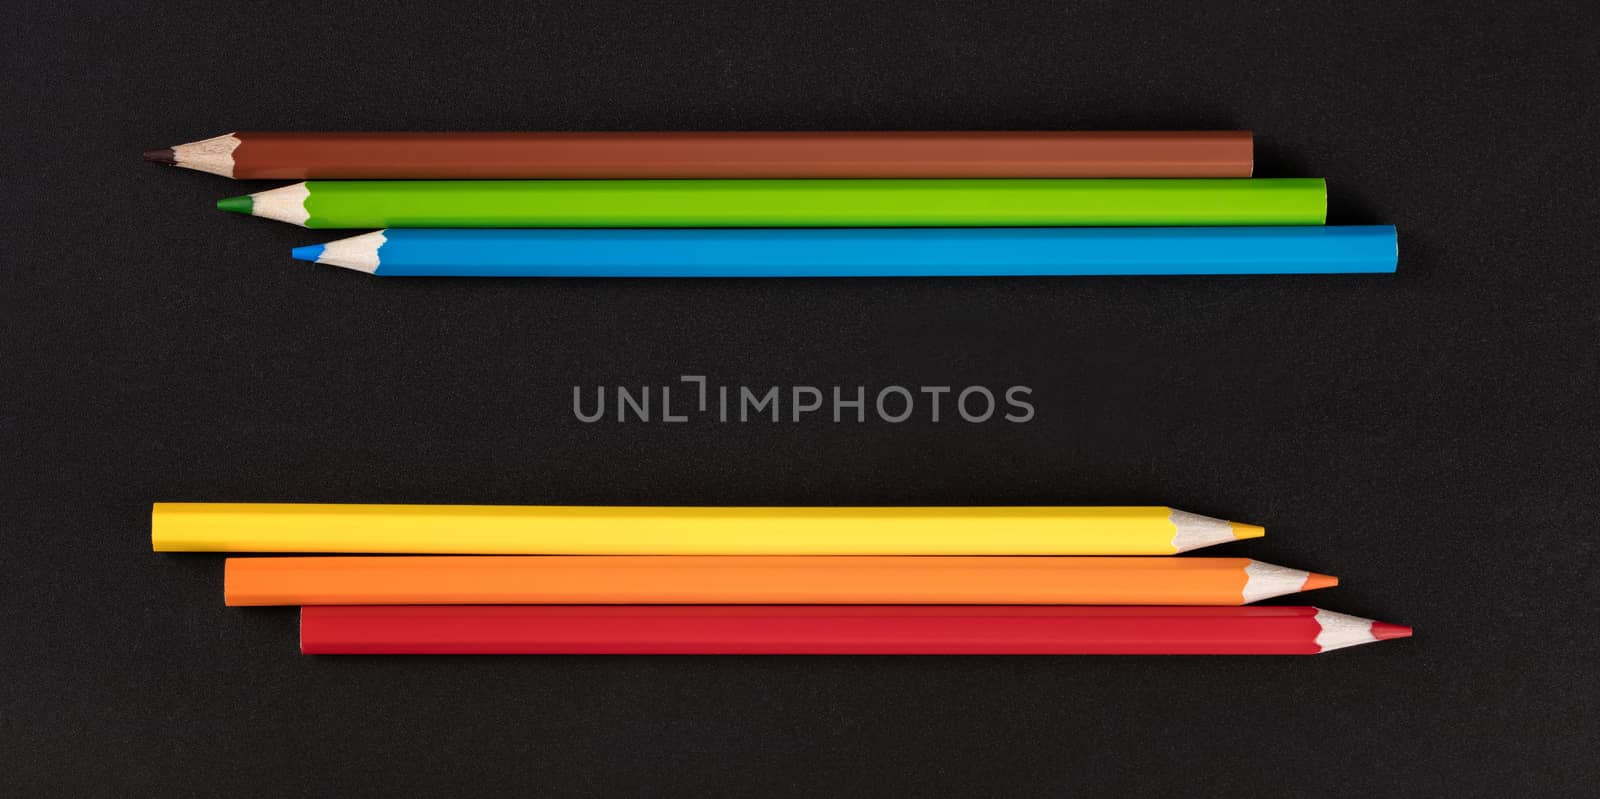 multicolored sharpened pencils close-up on a black background